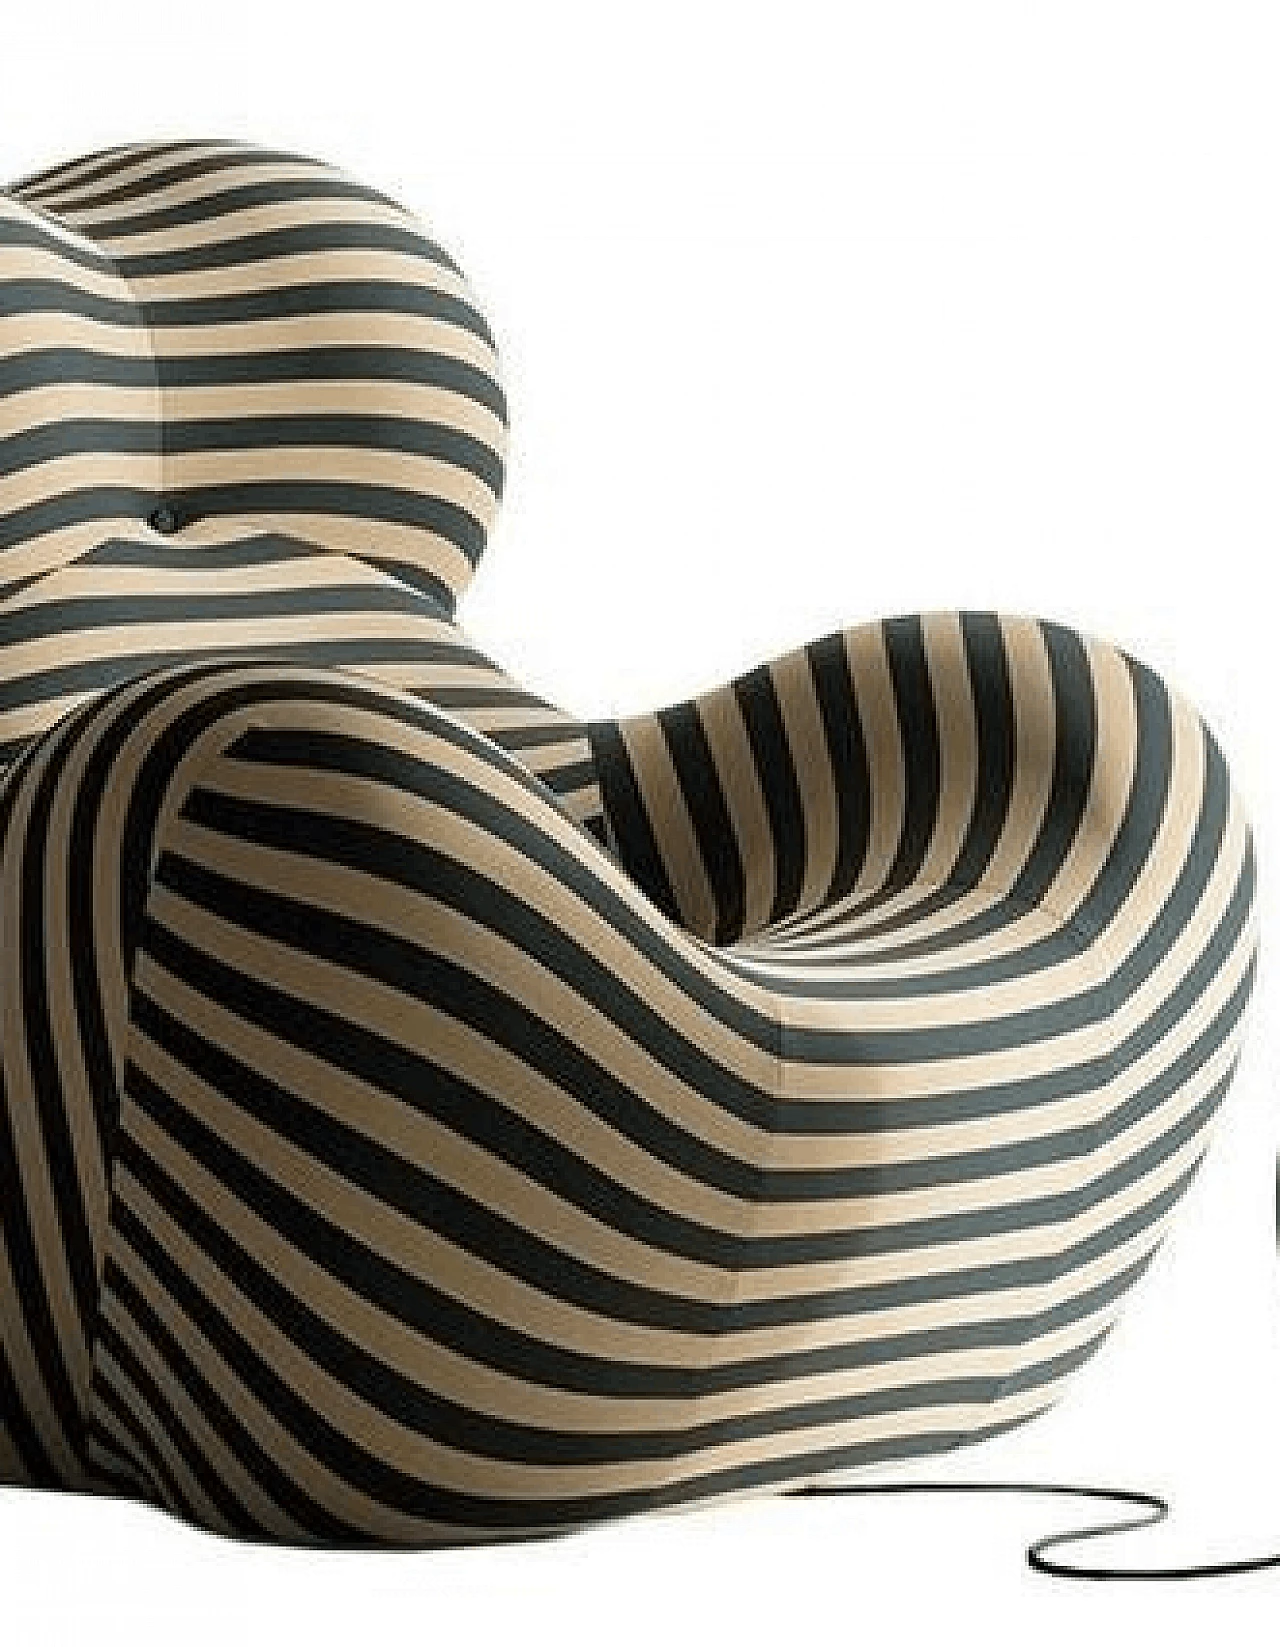 UP 50 armchair and pouf by Gaetano Pesce for B&B Italia 1